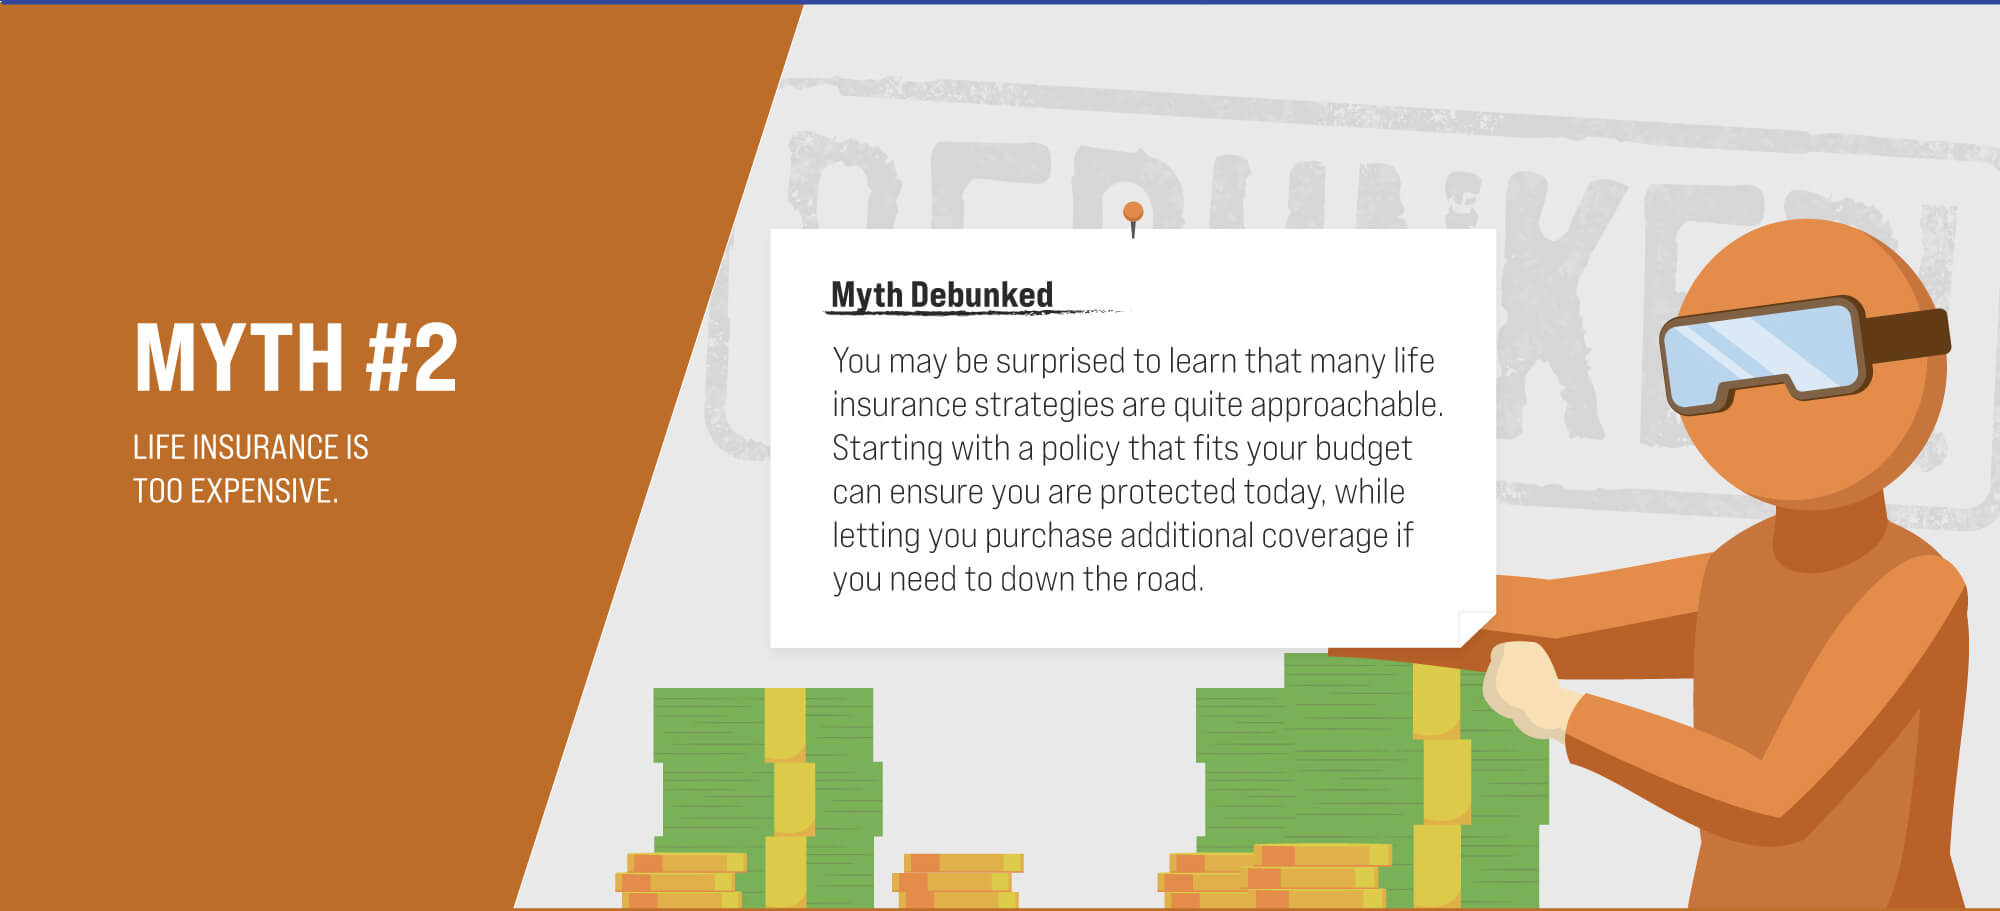 Myth #2: Life insurance is too expensive. Myth Debunked. You may be surprised to learn that many life insurance strategies are quite approachable. Starting with a policy that fits your budget can make sure you are protected today, while letting you purchase additional coverage down the road if you need to. (2)